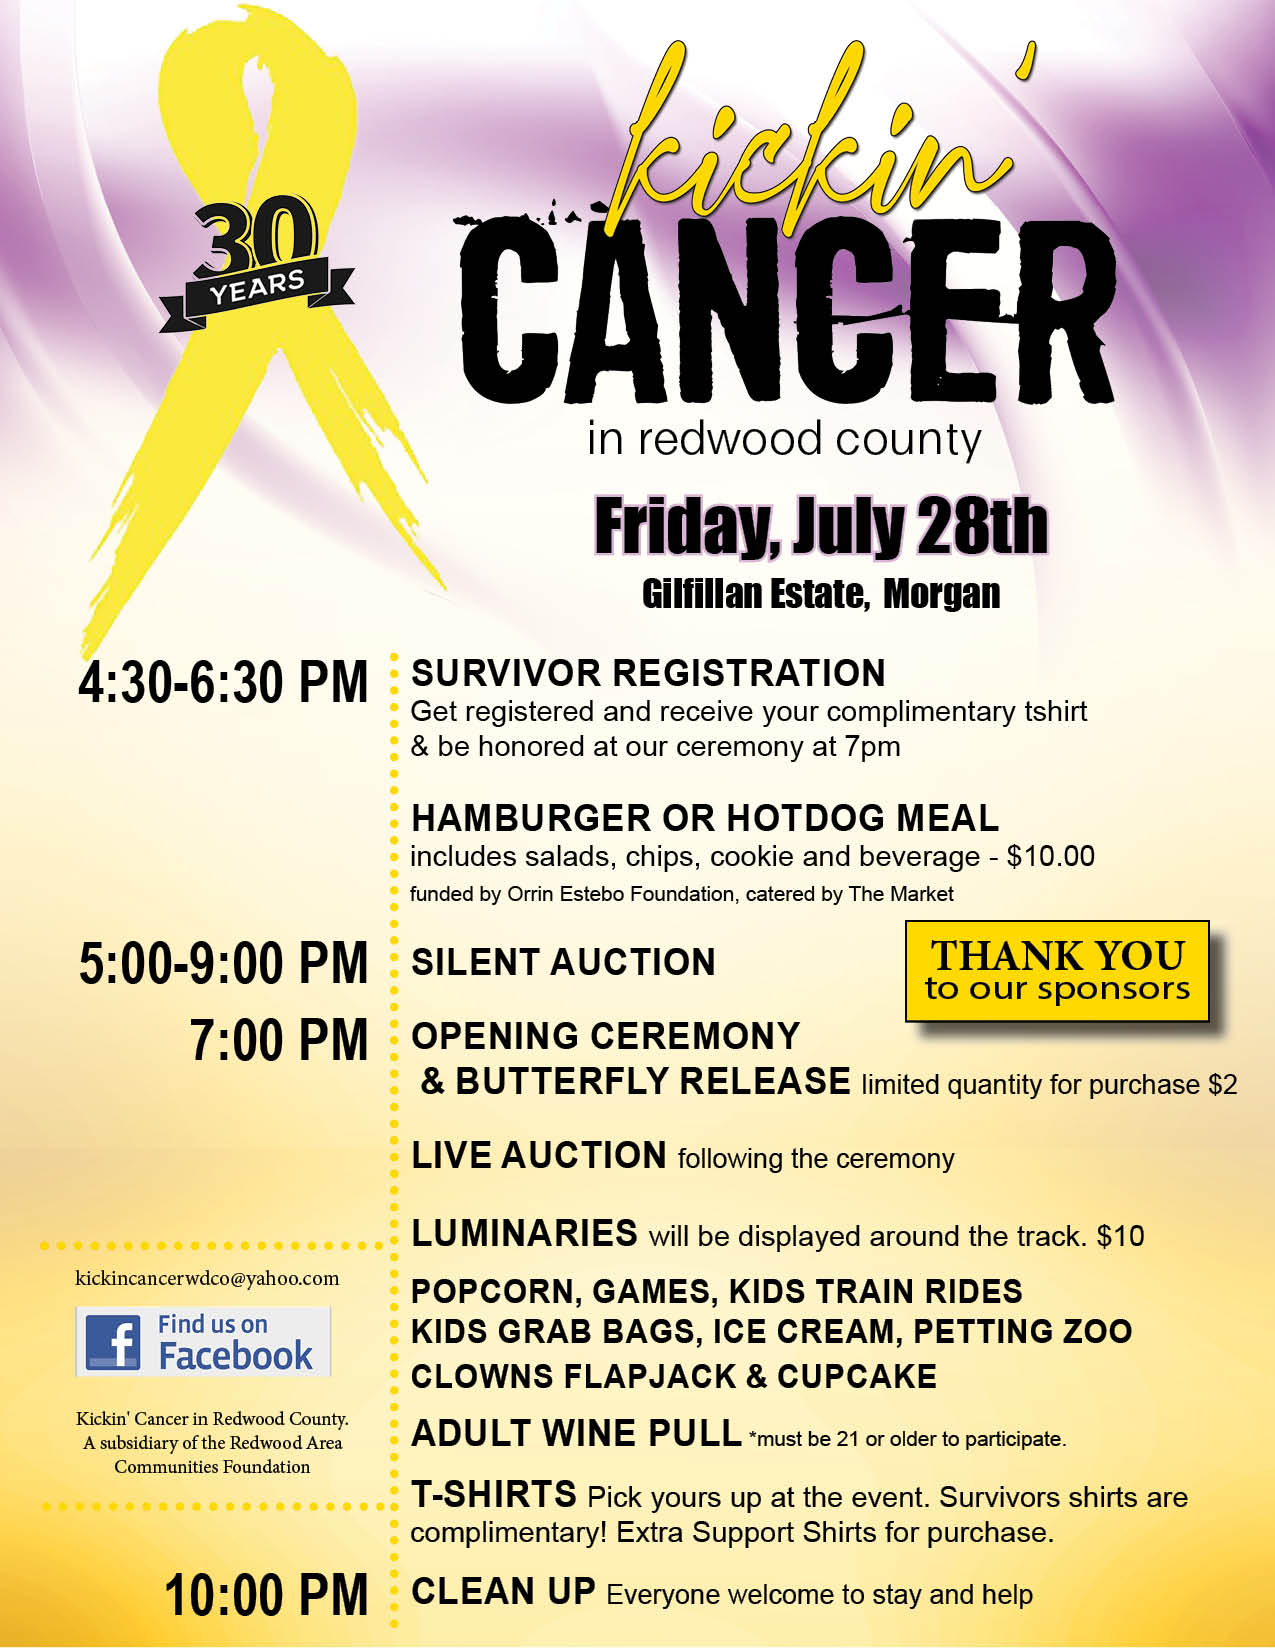 <h1 class="tribe-events-single-event-title">Kickin’ Cancer In Redwood County</h1>